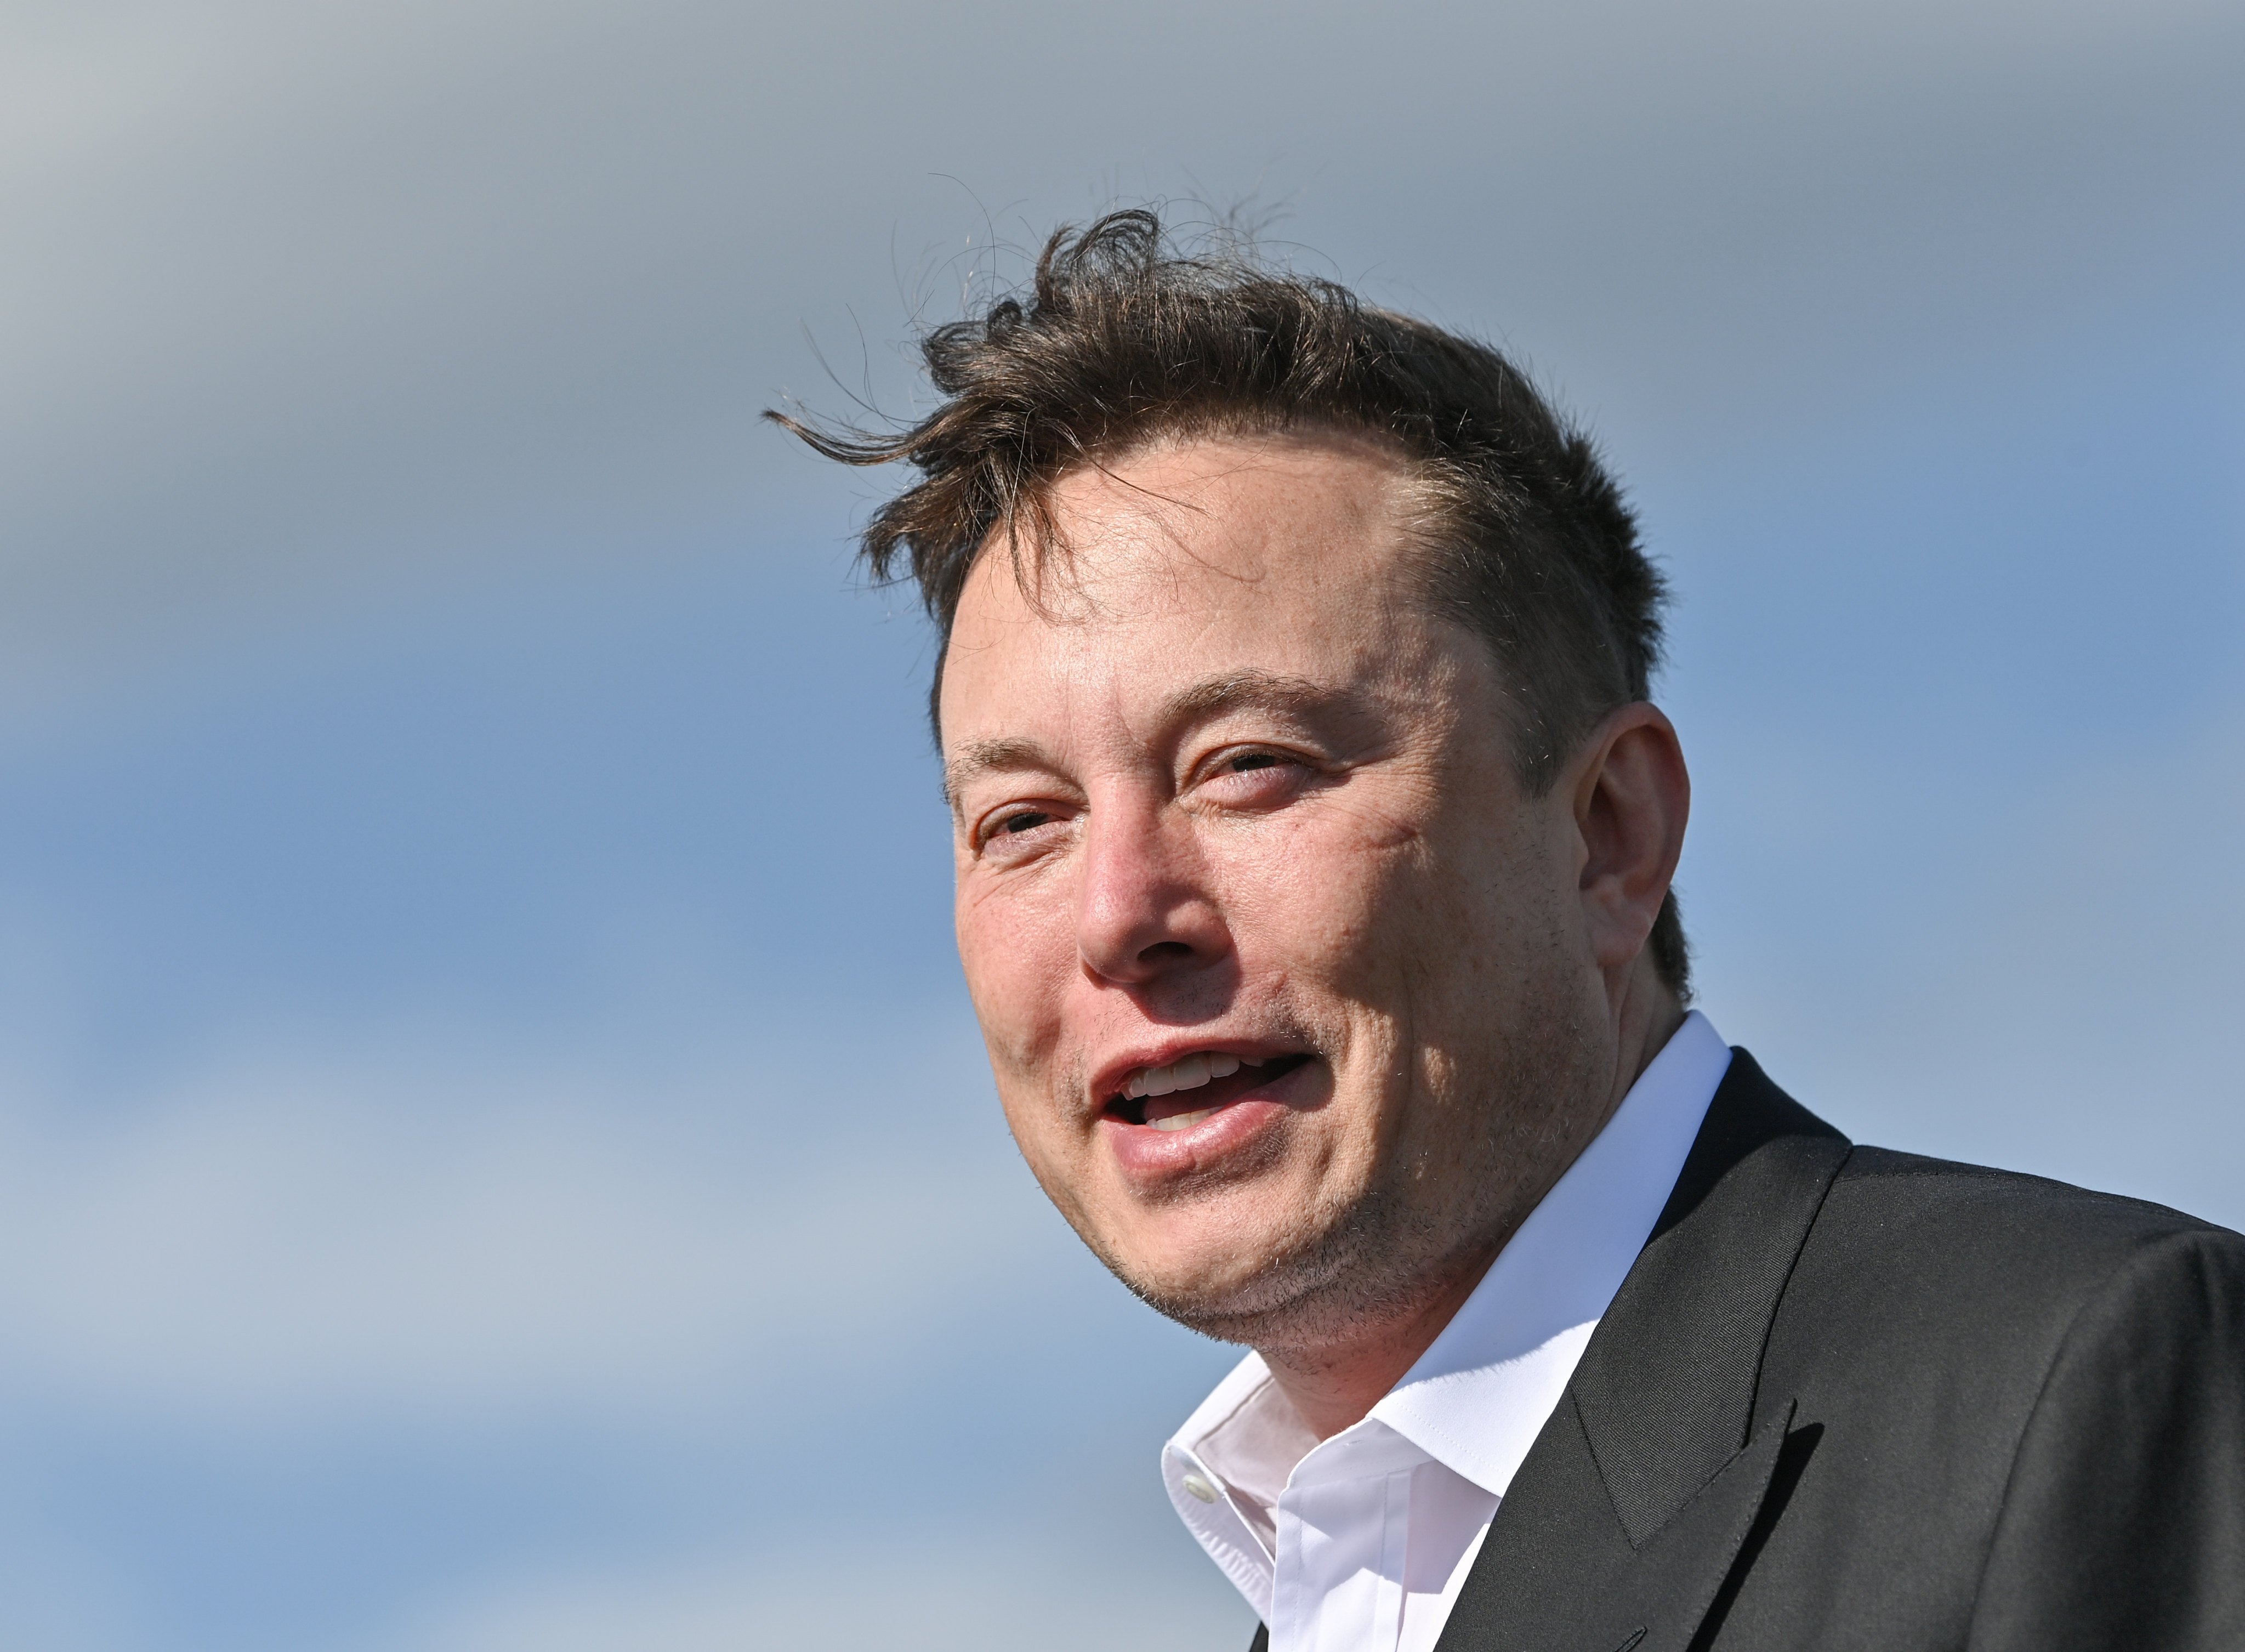 Tesla CEO Elon Musk, a co-founder of OpenAI, has sued the start-up for breaching their founding agreement. Photo: dpa